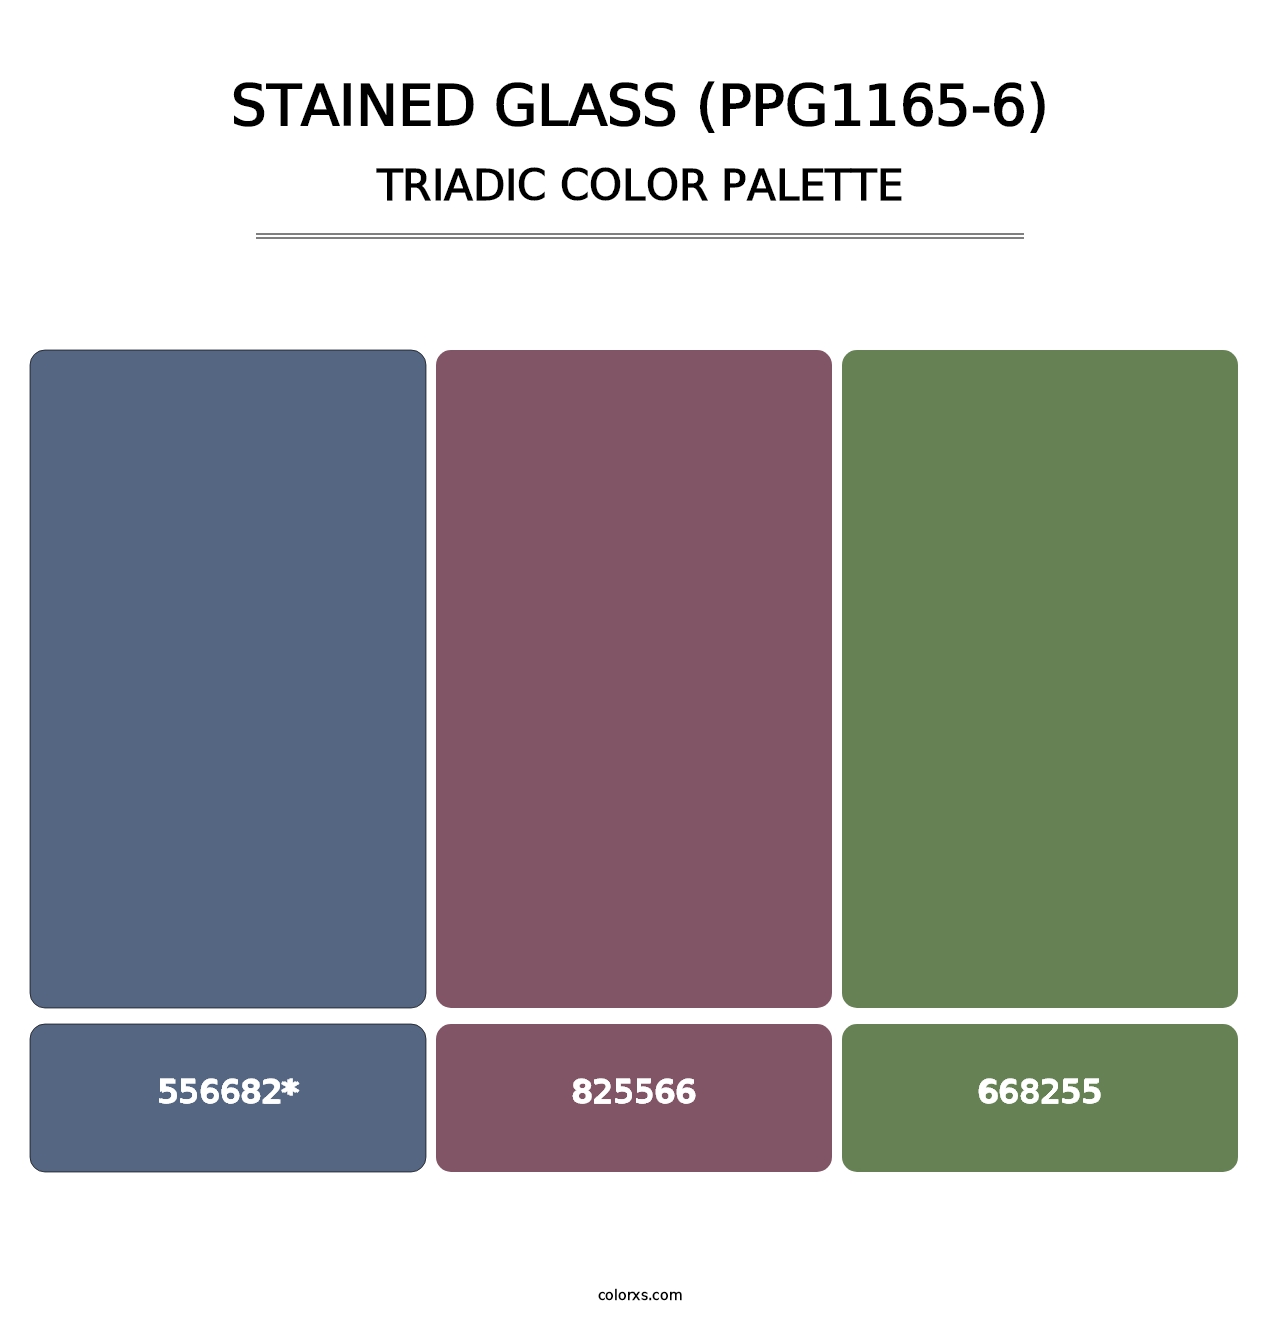 Stained Glass (PPG1165-6) - Triadic Color Palette